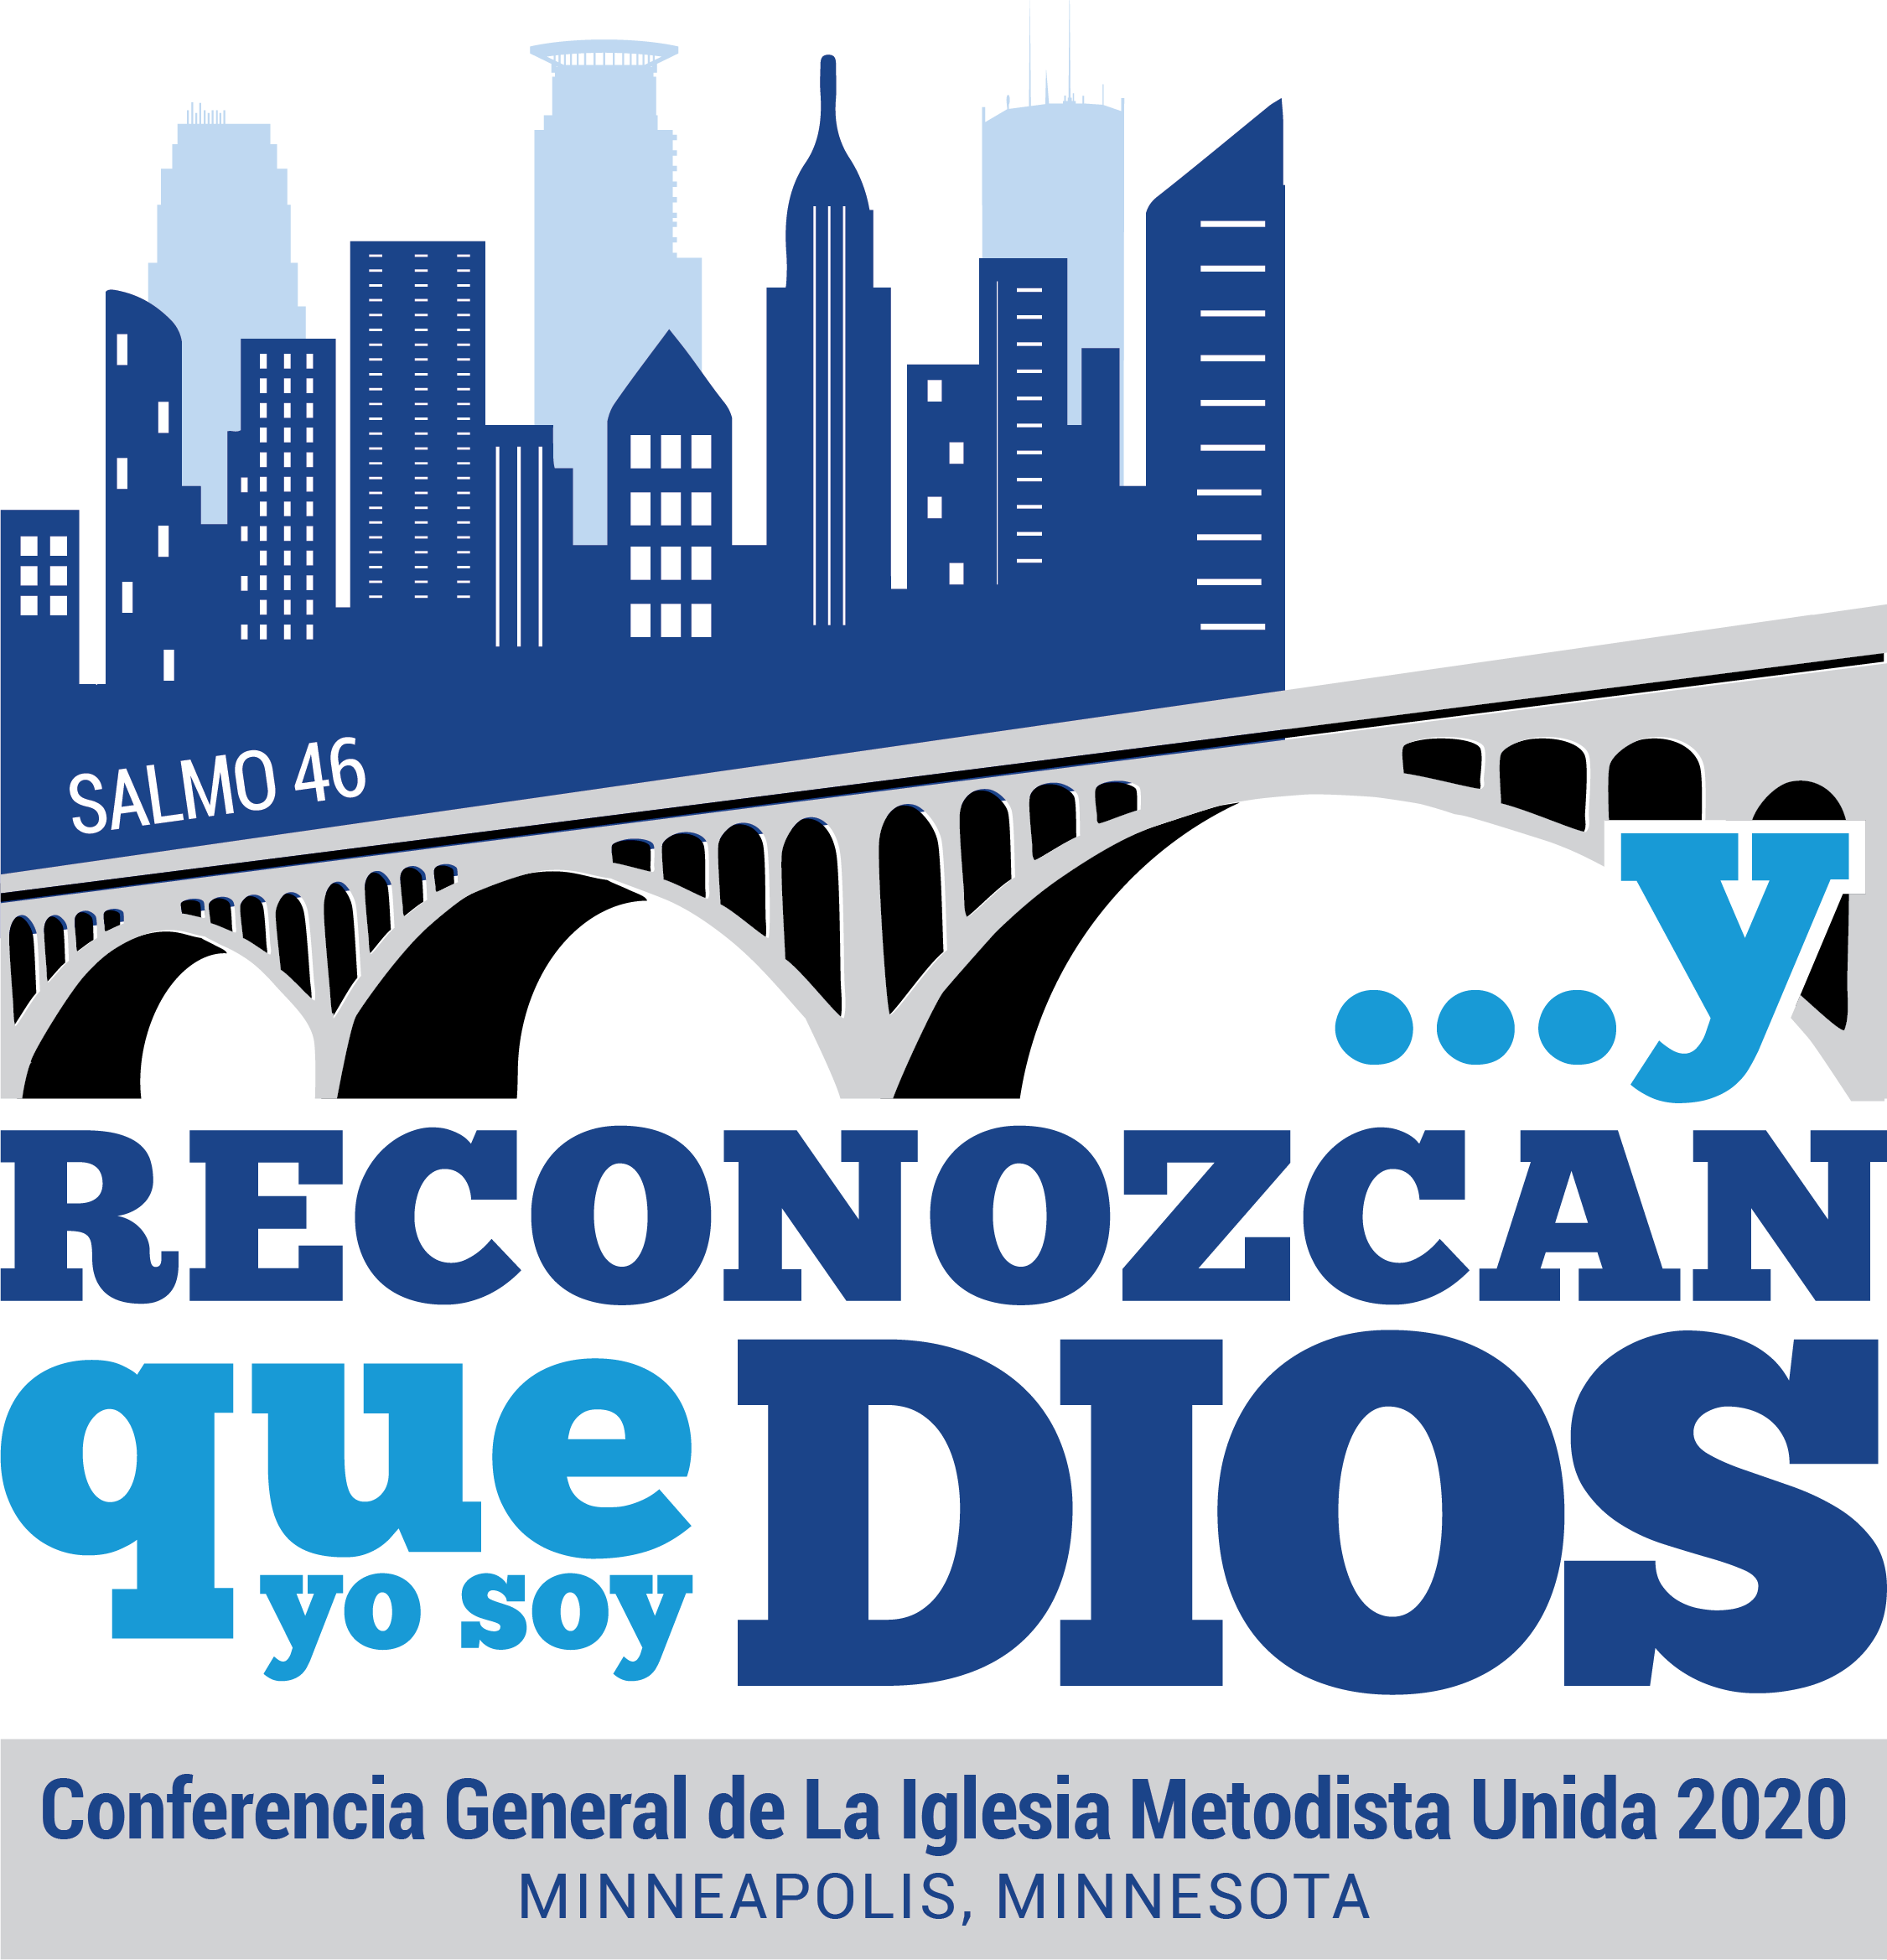 The official logo of General Conference 2020